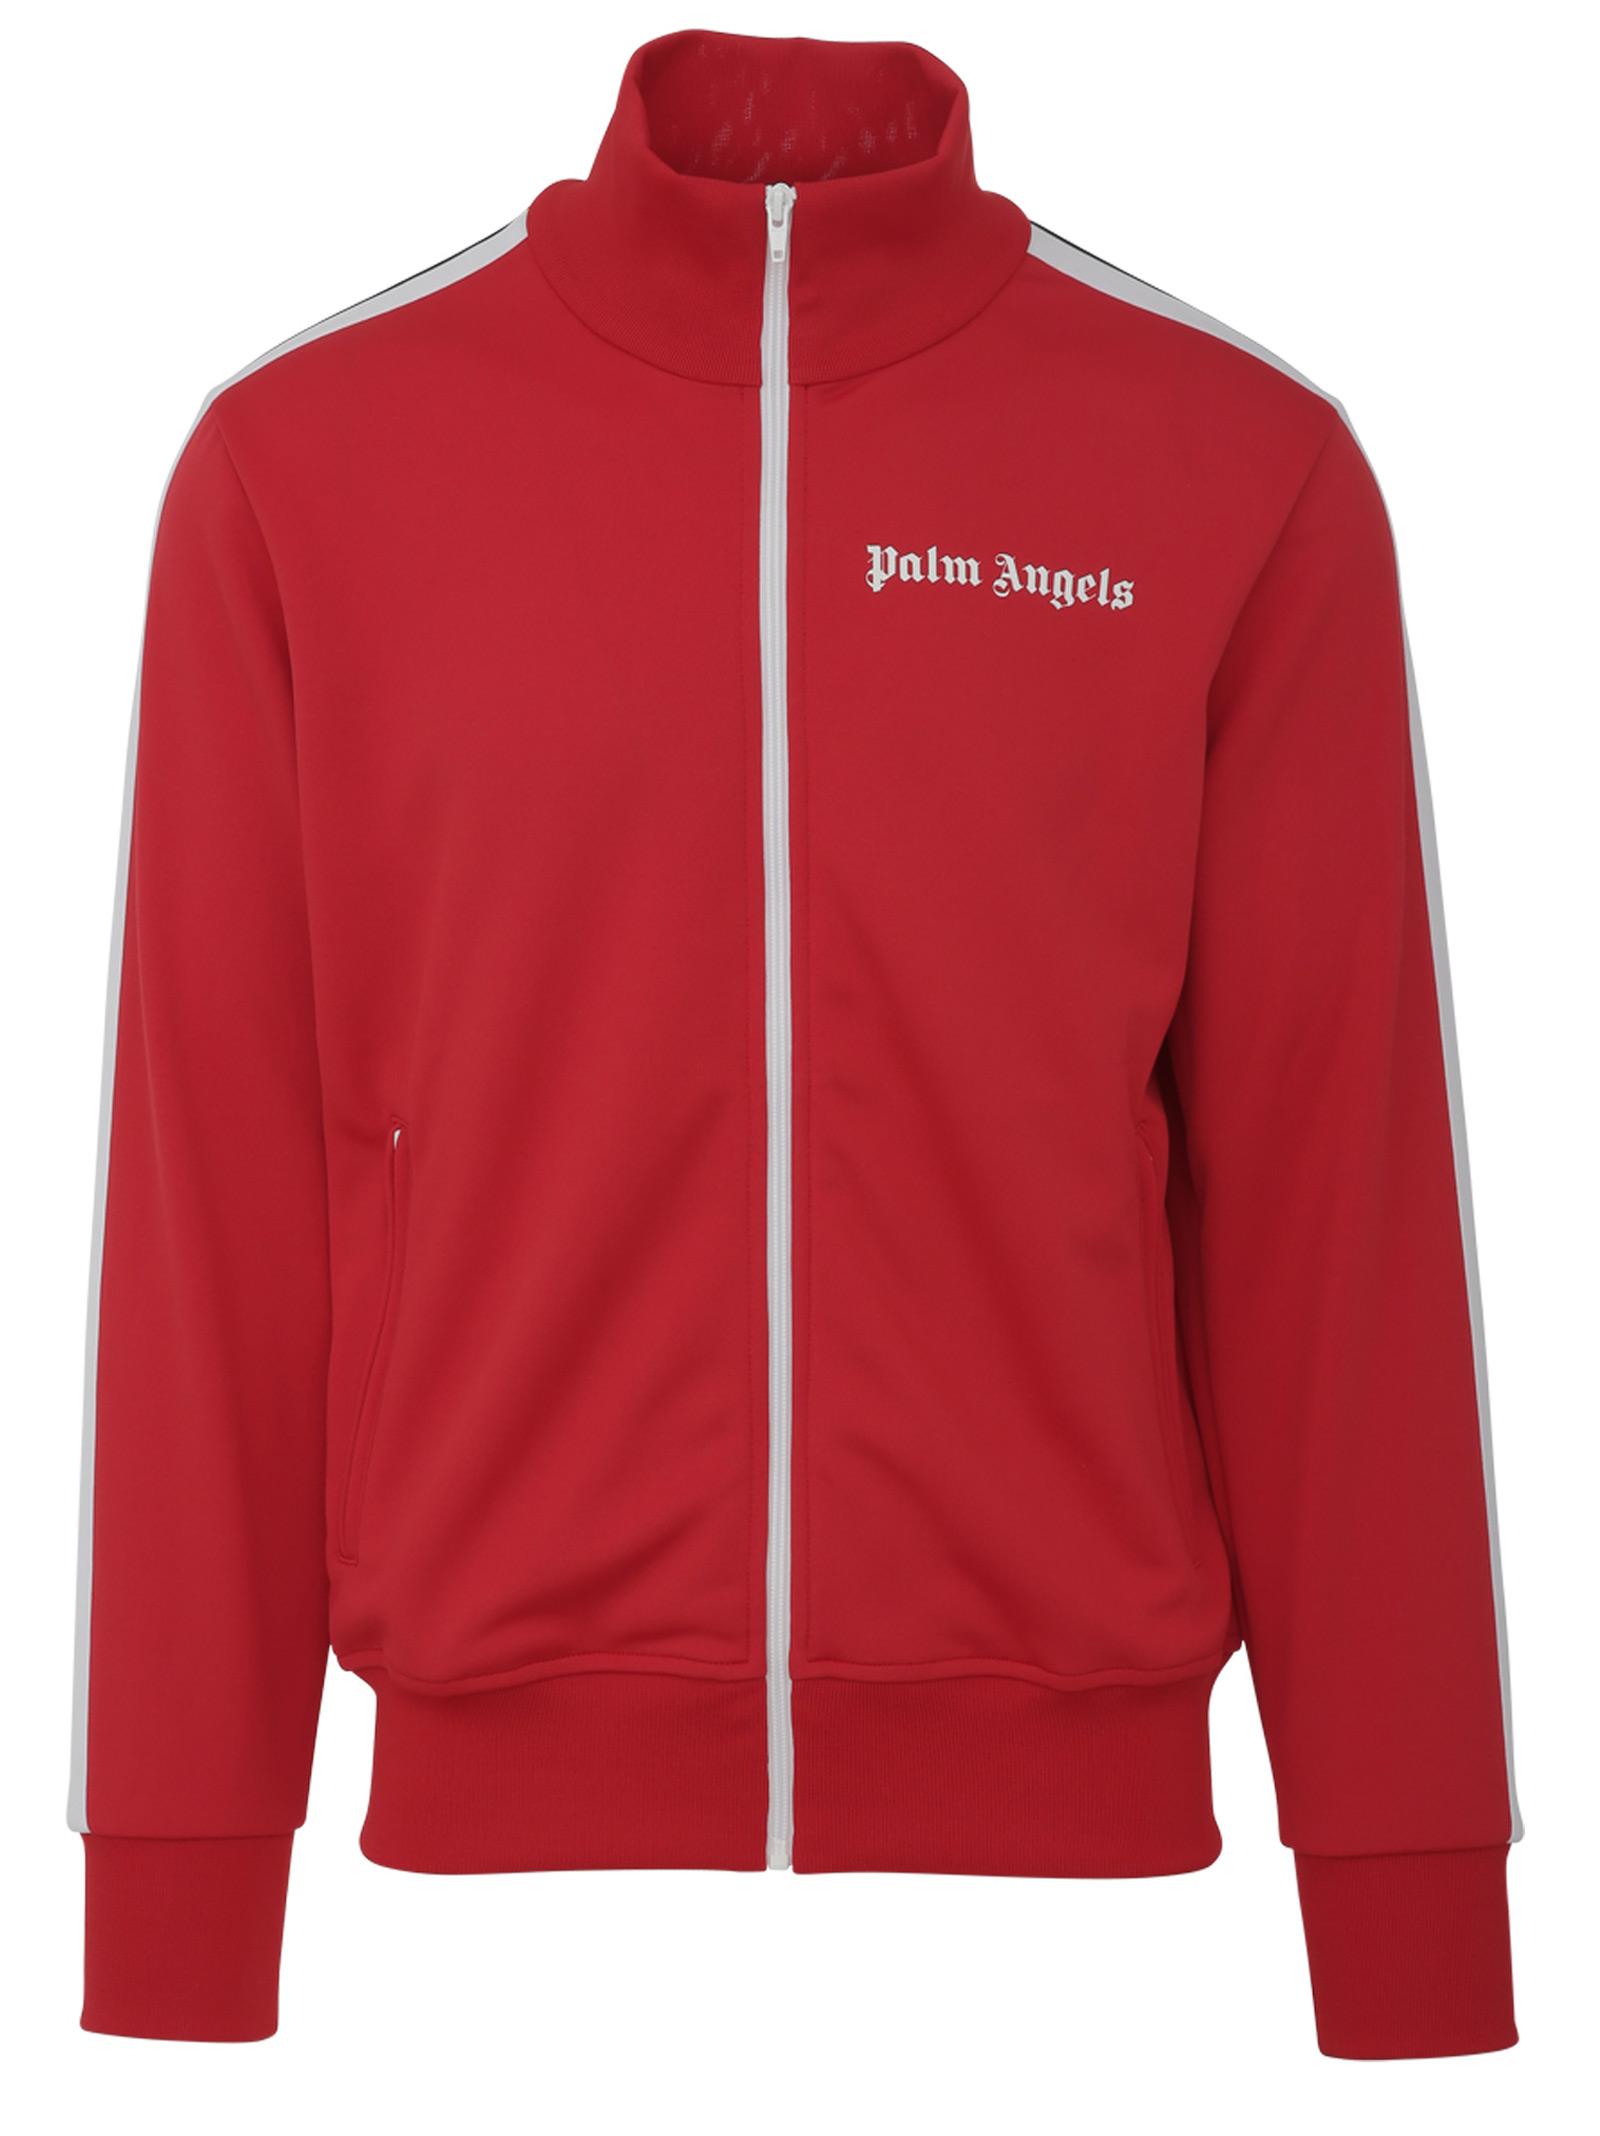 Palm Angels Denim Classic Track Jacket in Red for Men - Lyst